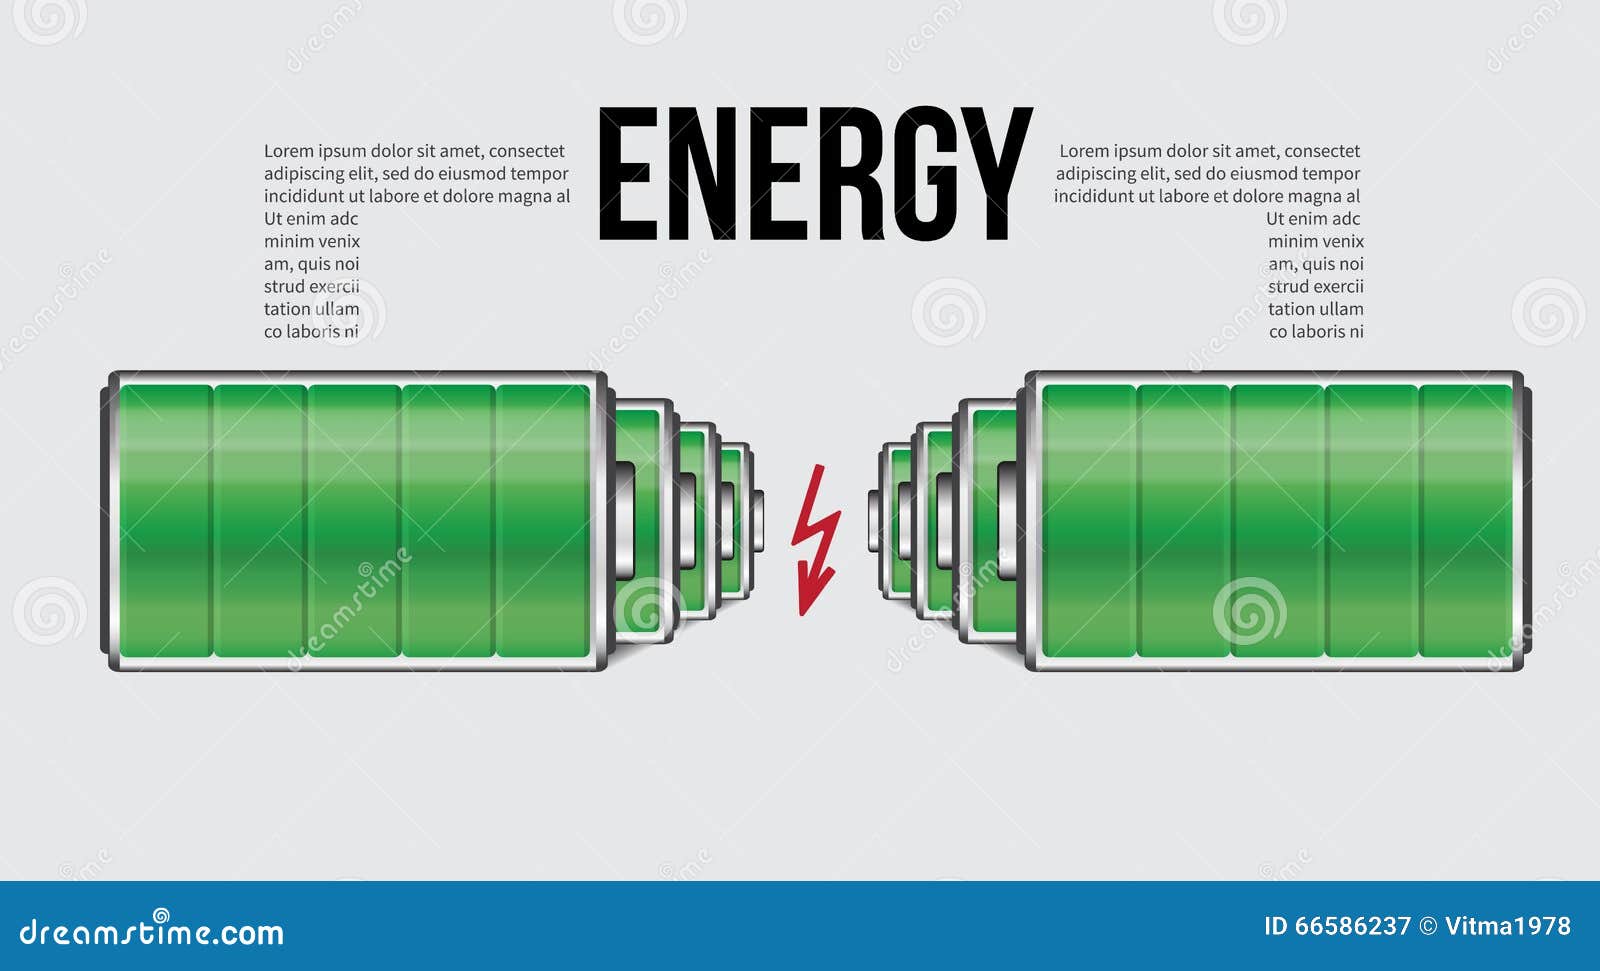 Battery Element Infographic Template  Design Concept For